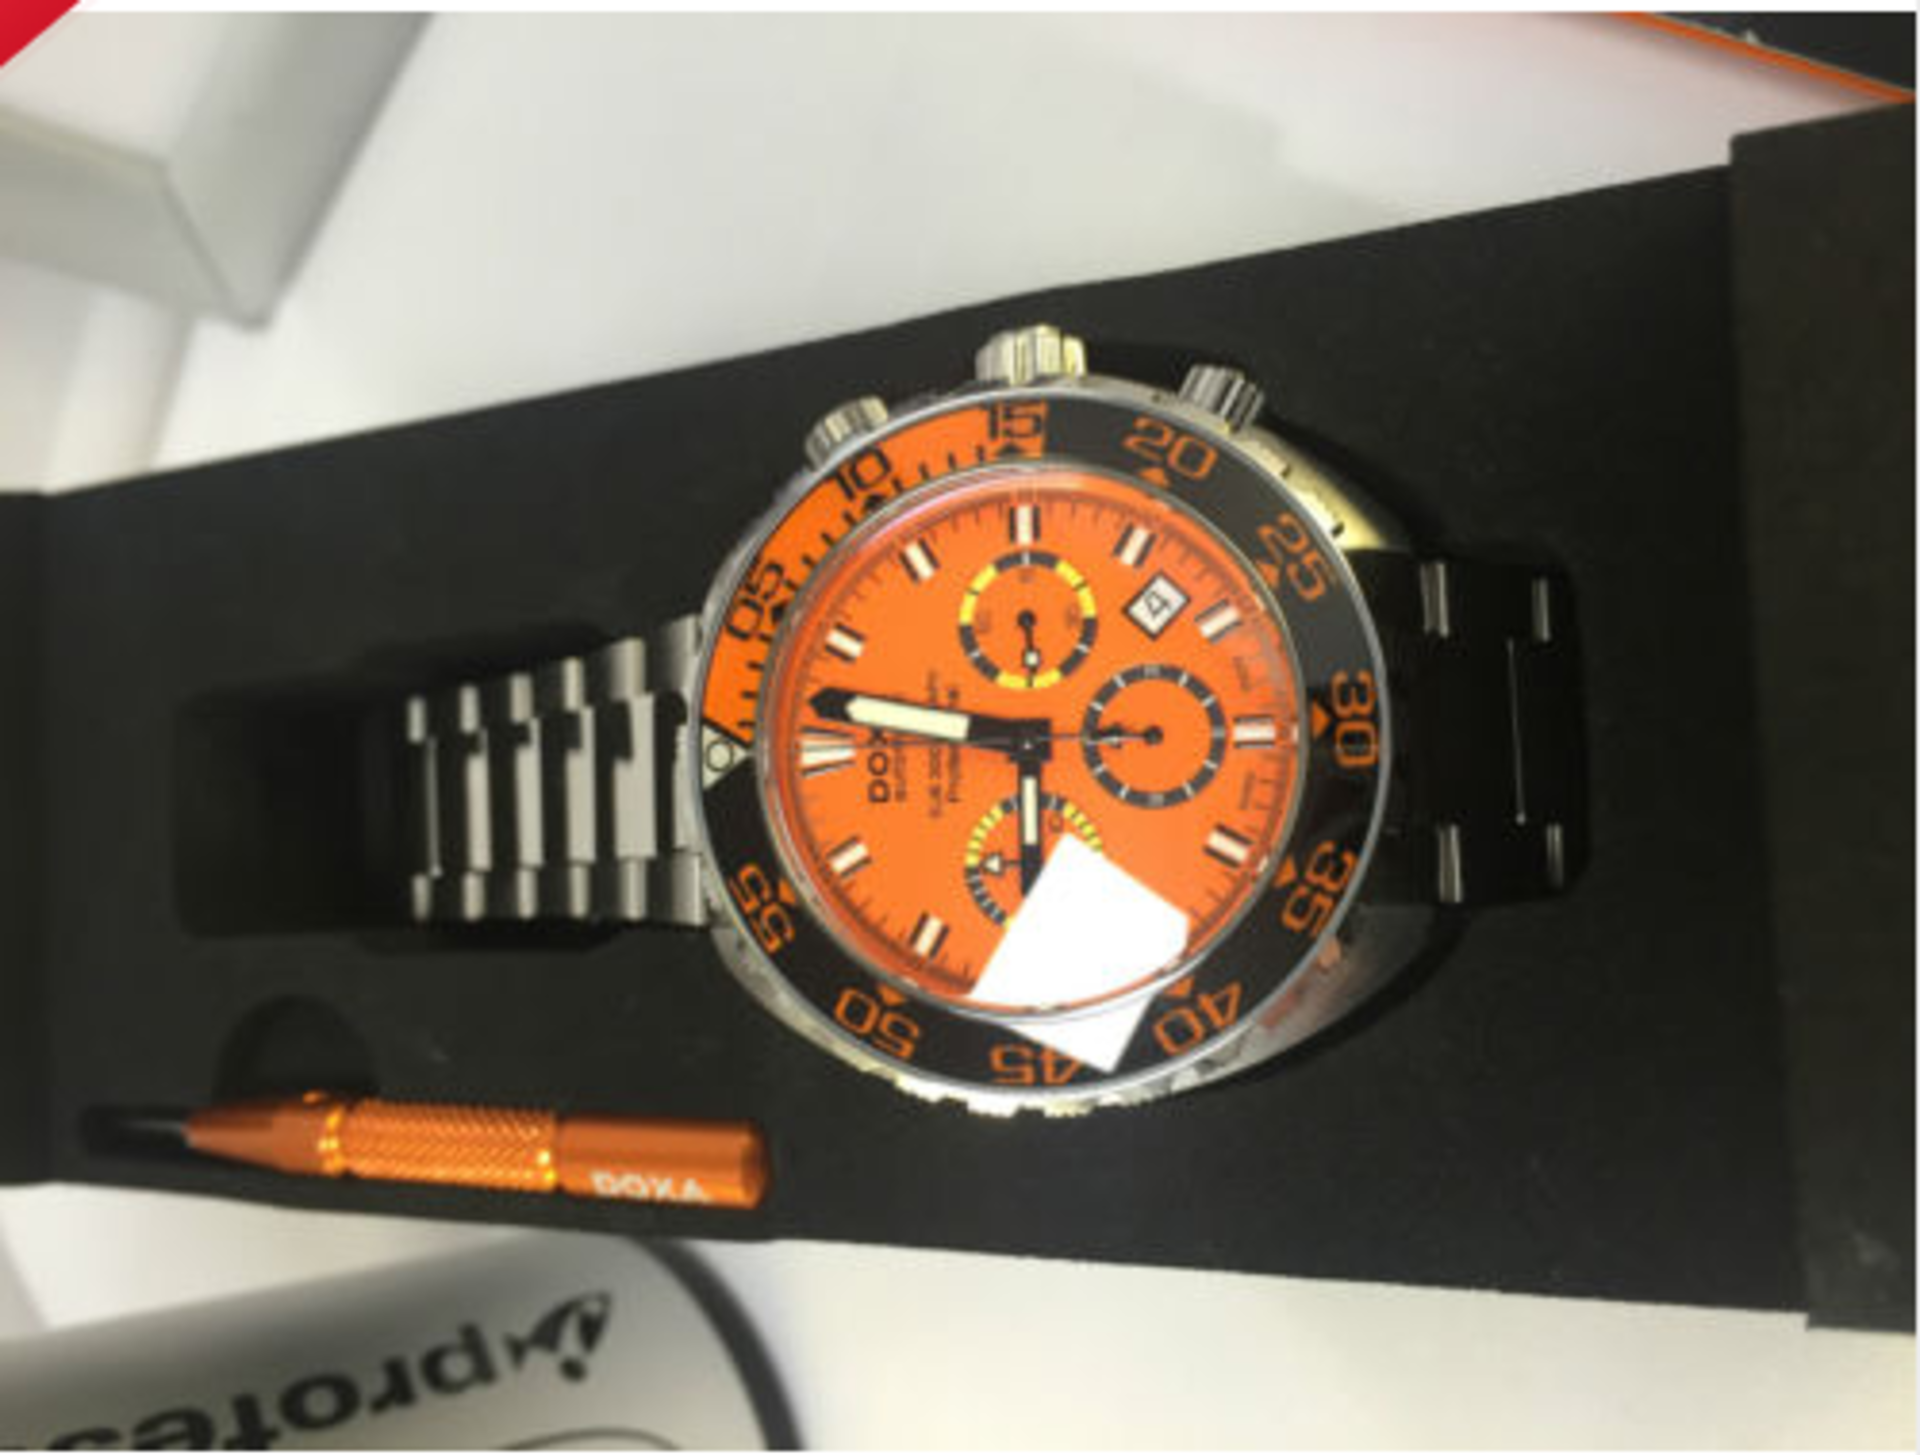 Brand New - Doxa Sub 300 T-Graph Professional Sapphire Bezel Men's Automatic Watch - RRP £3490 - Image 3 of 4